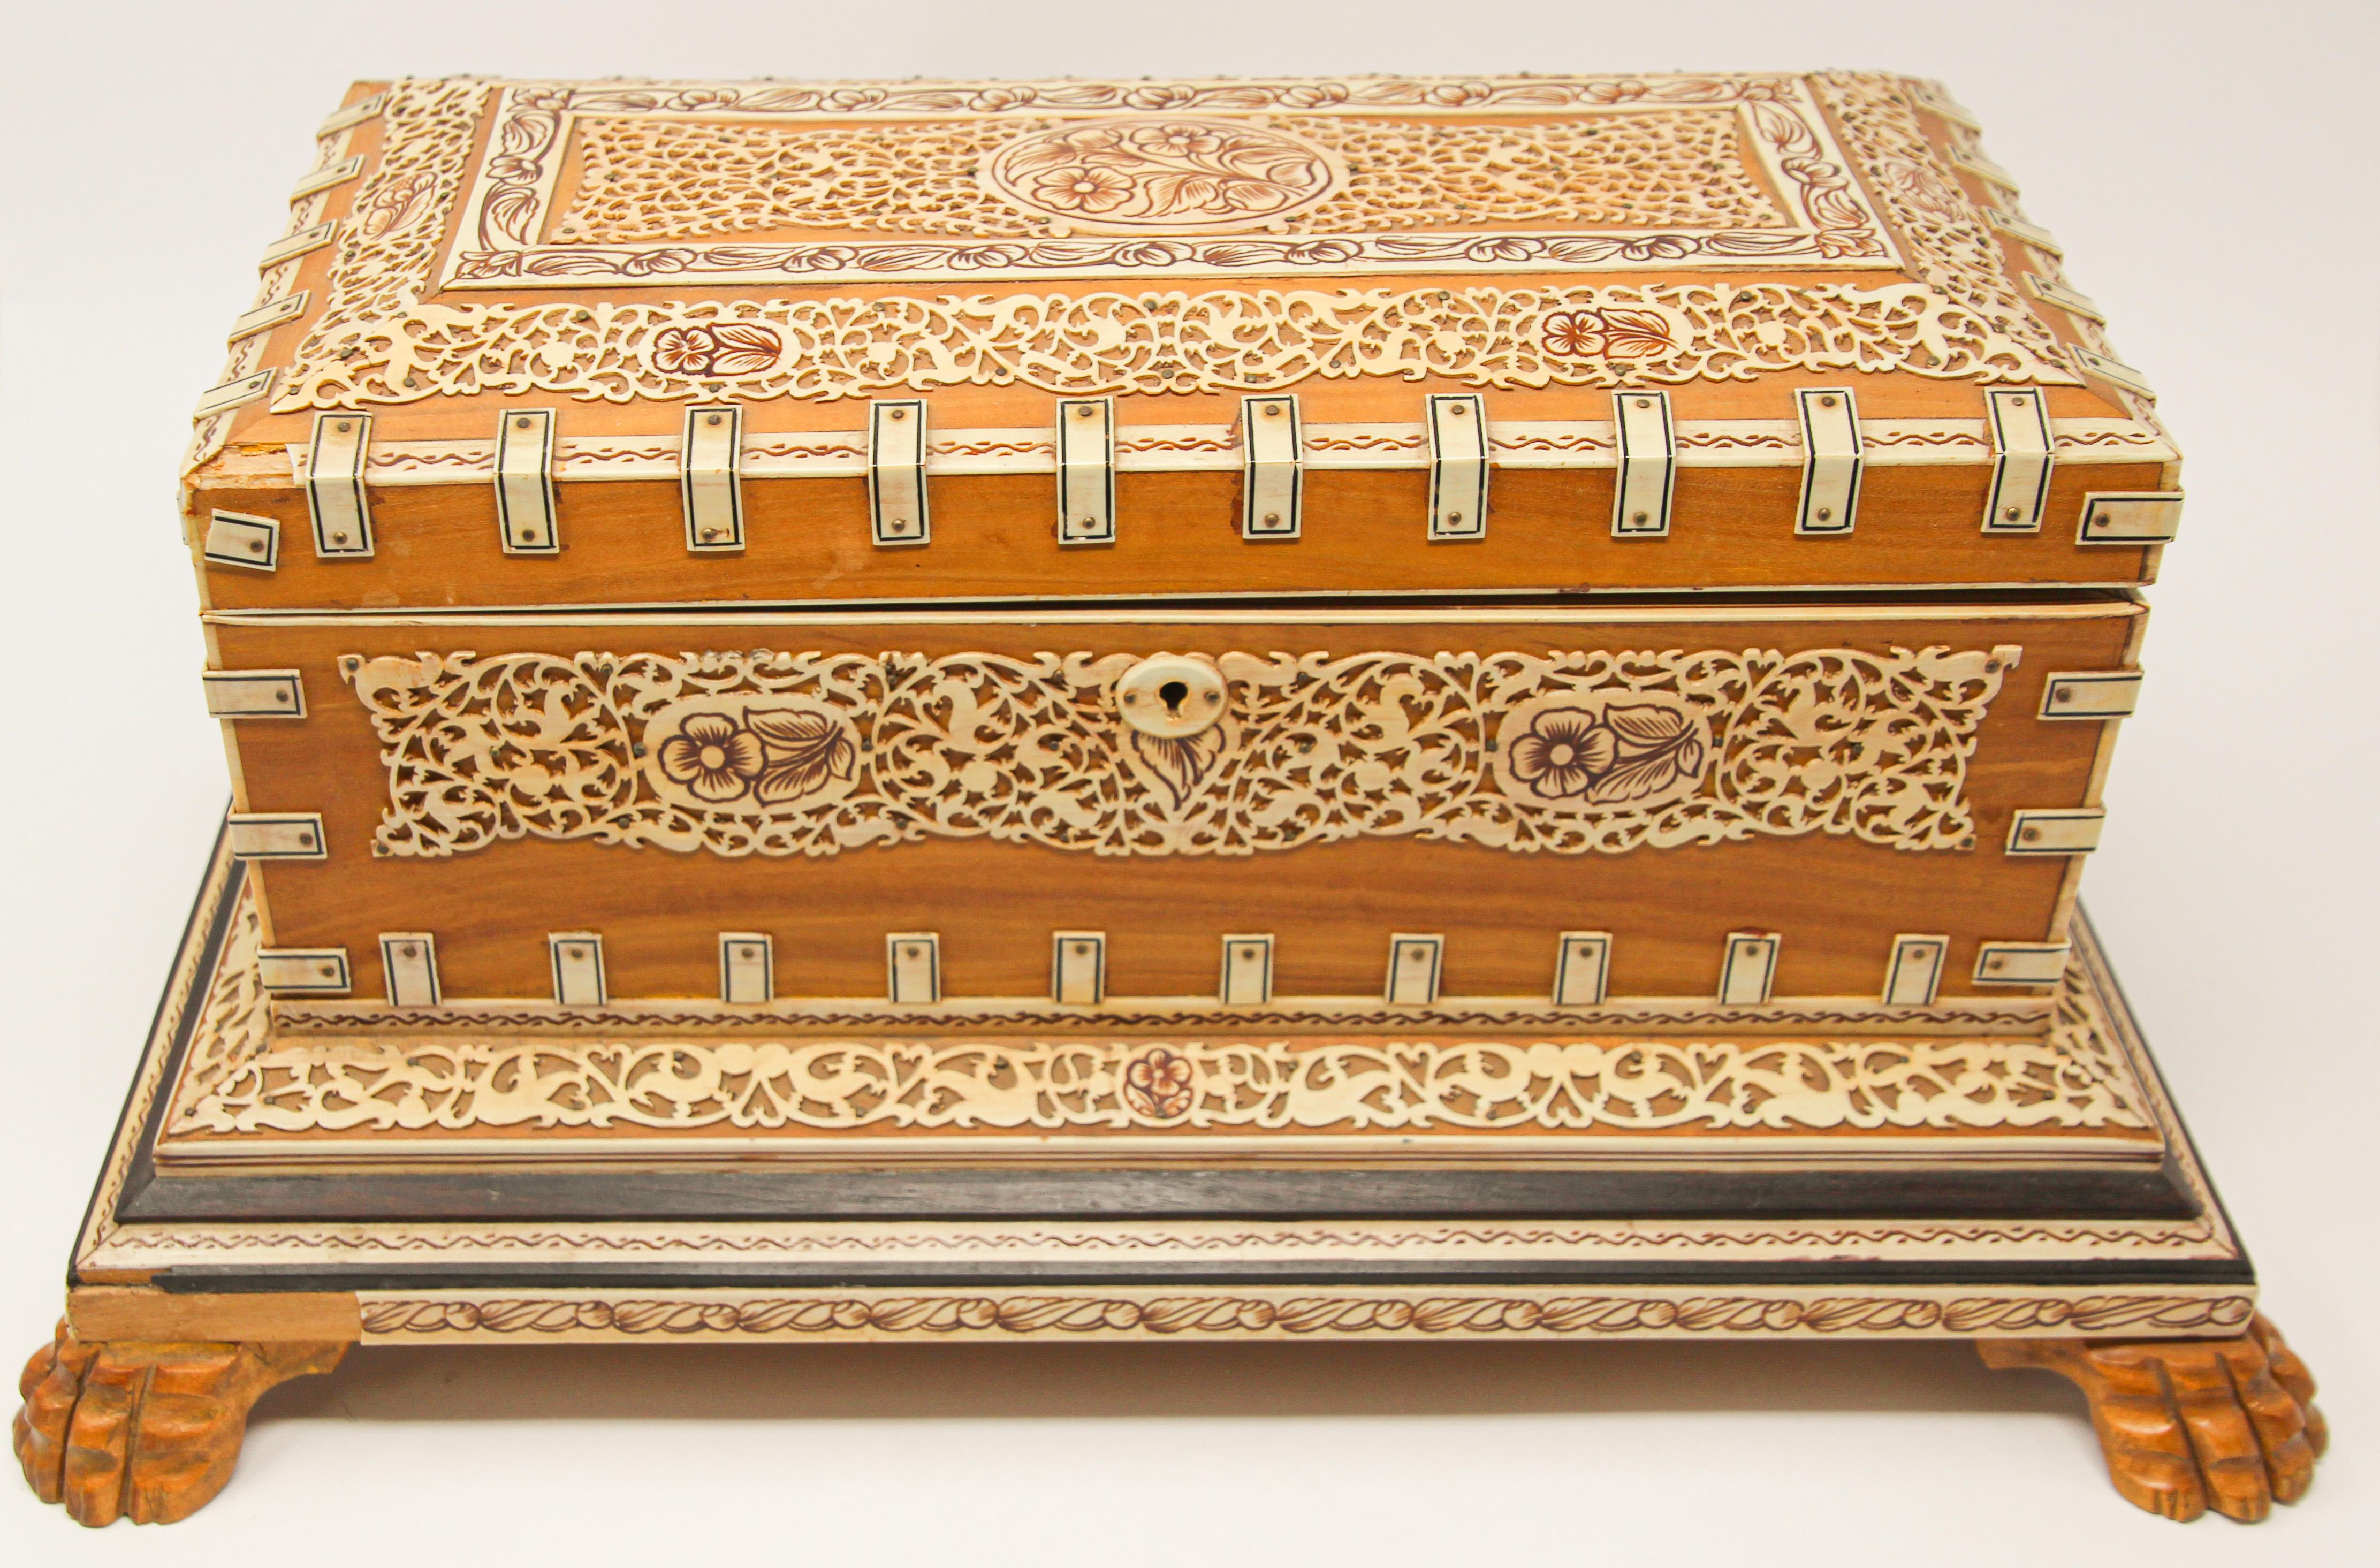 Hand-Carved Decorative Anglo-Indian Mughal Style Overlay Footed Box